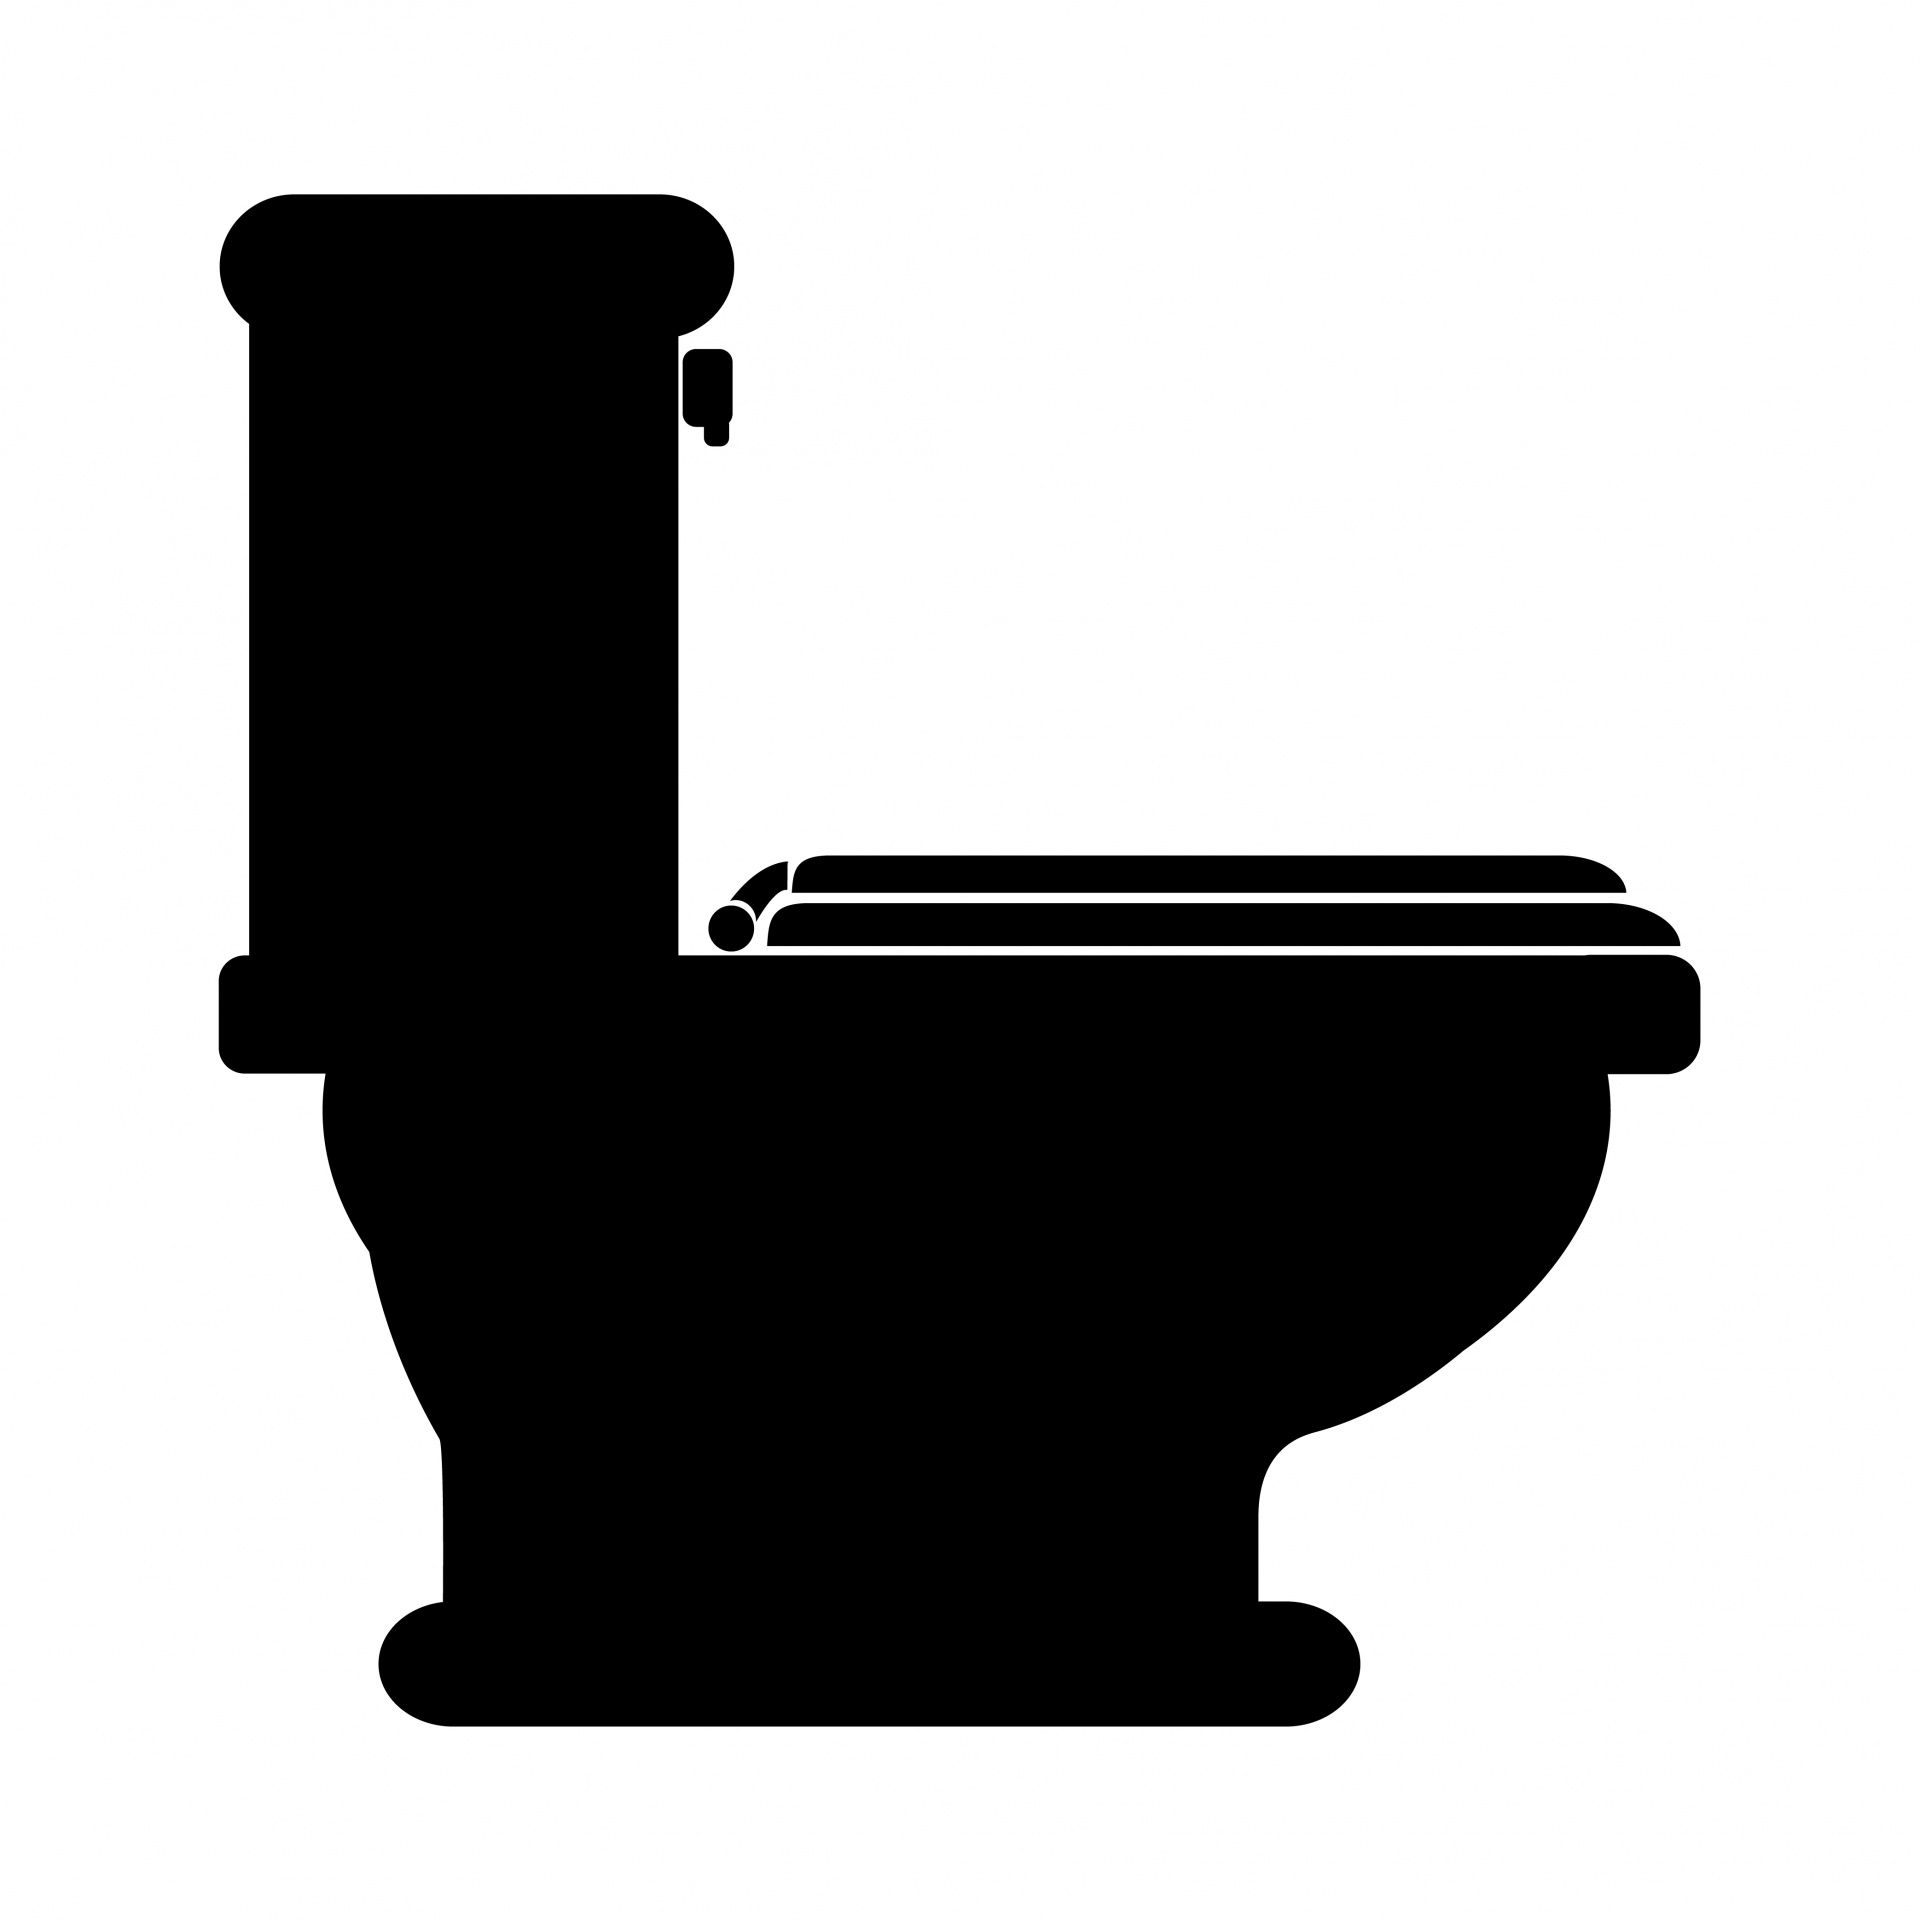 image clipart wc - photo #49